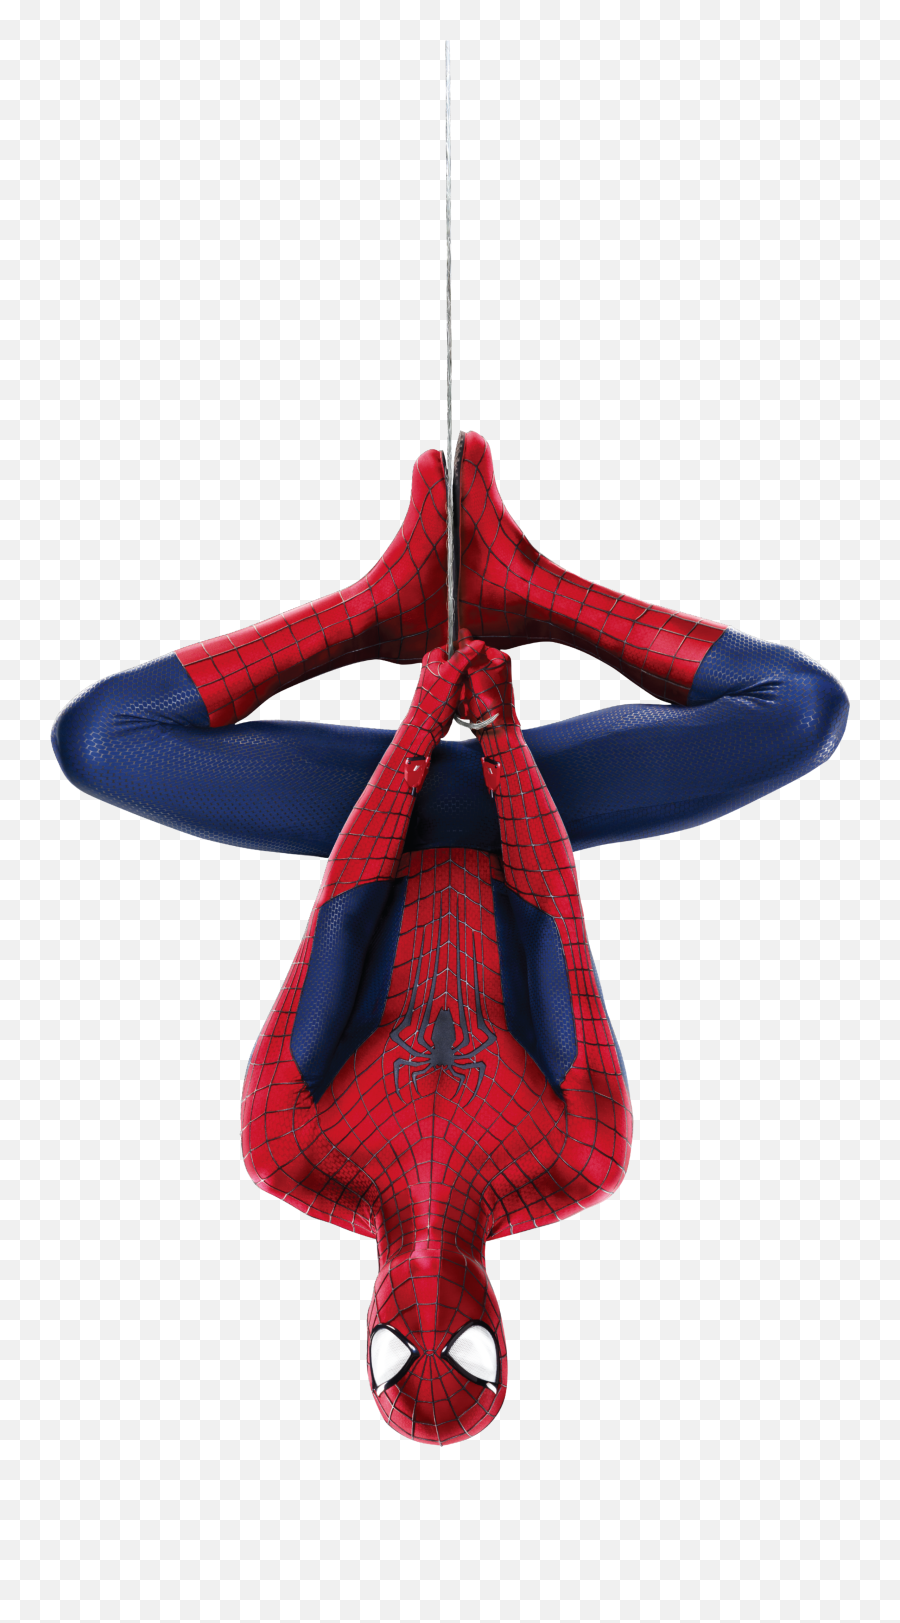 Download Spiderman Superhero Wall Spider Man Comics Decal Spider Man Wall Png Spiderman Comic Png Free Transparent Png Images Pngaaa Com - roblox spiderman mask decal